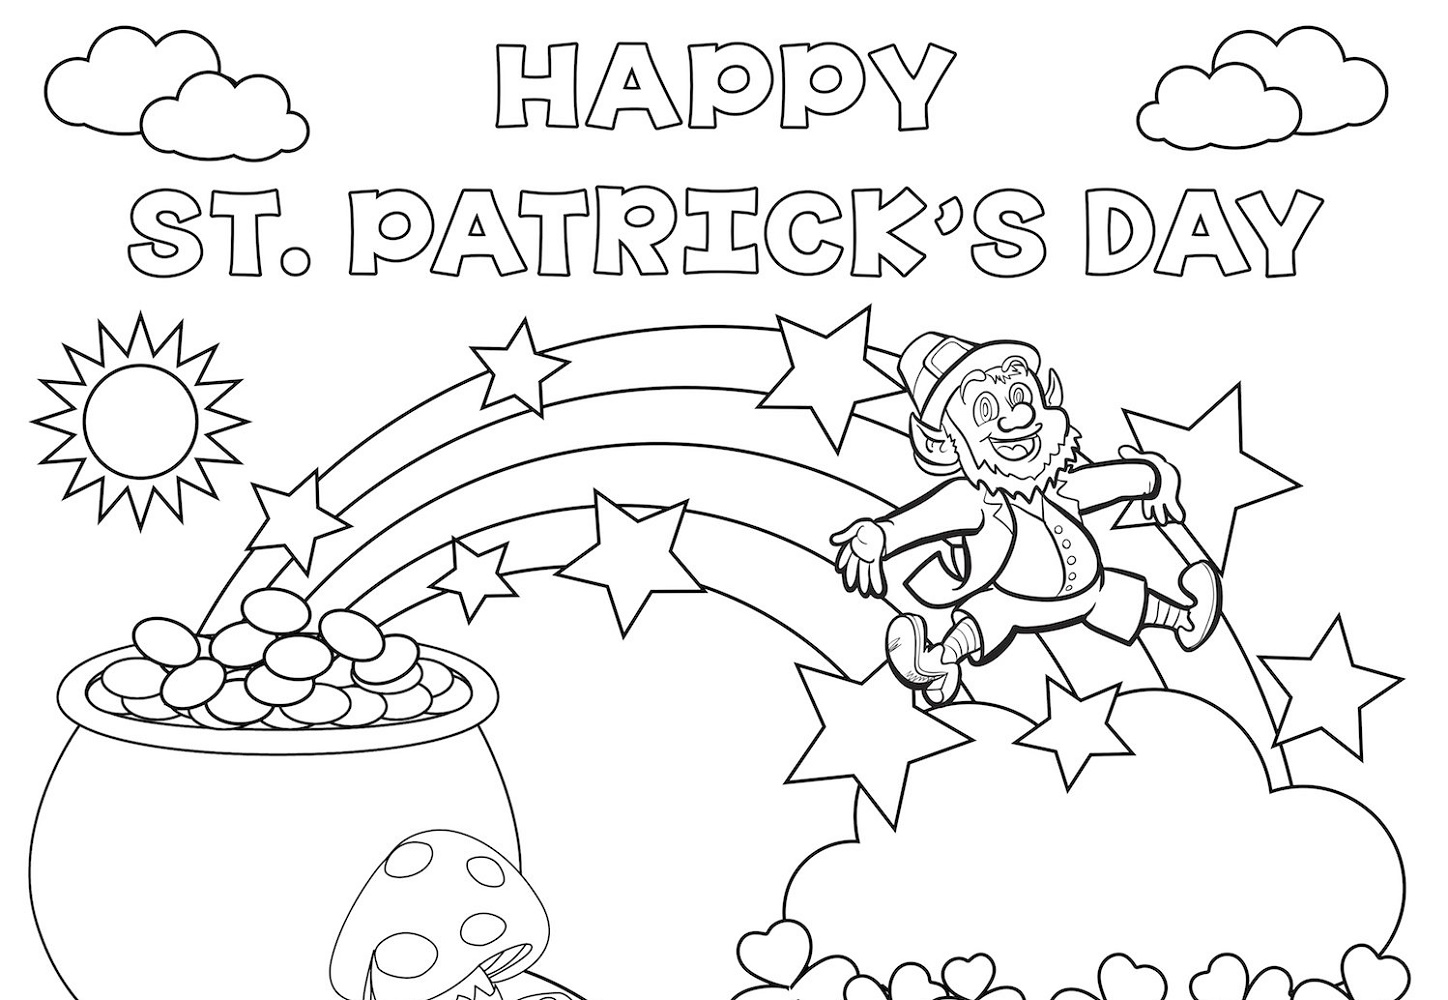 St Patrick's Day Coloring Sheets For Kids